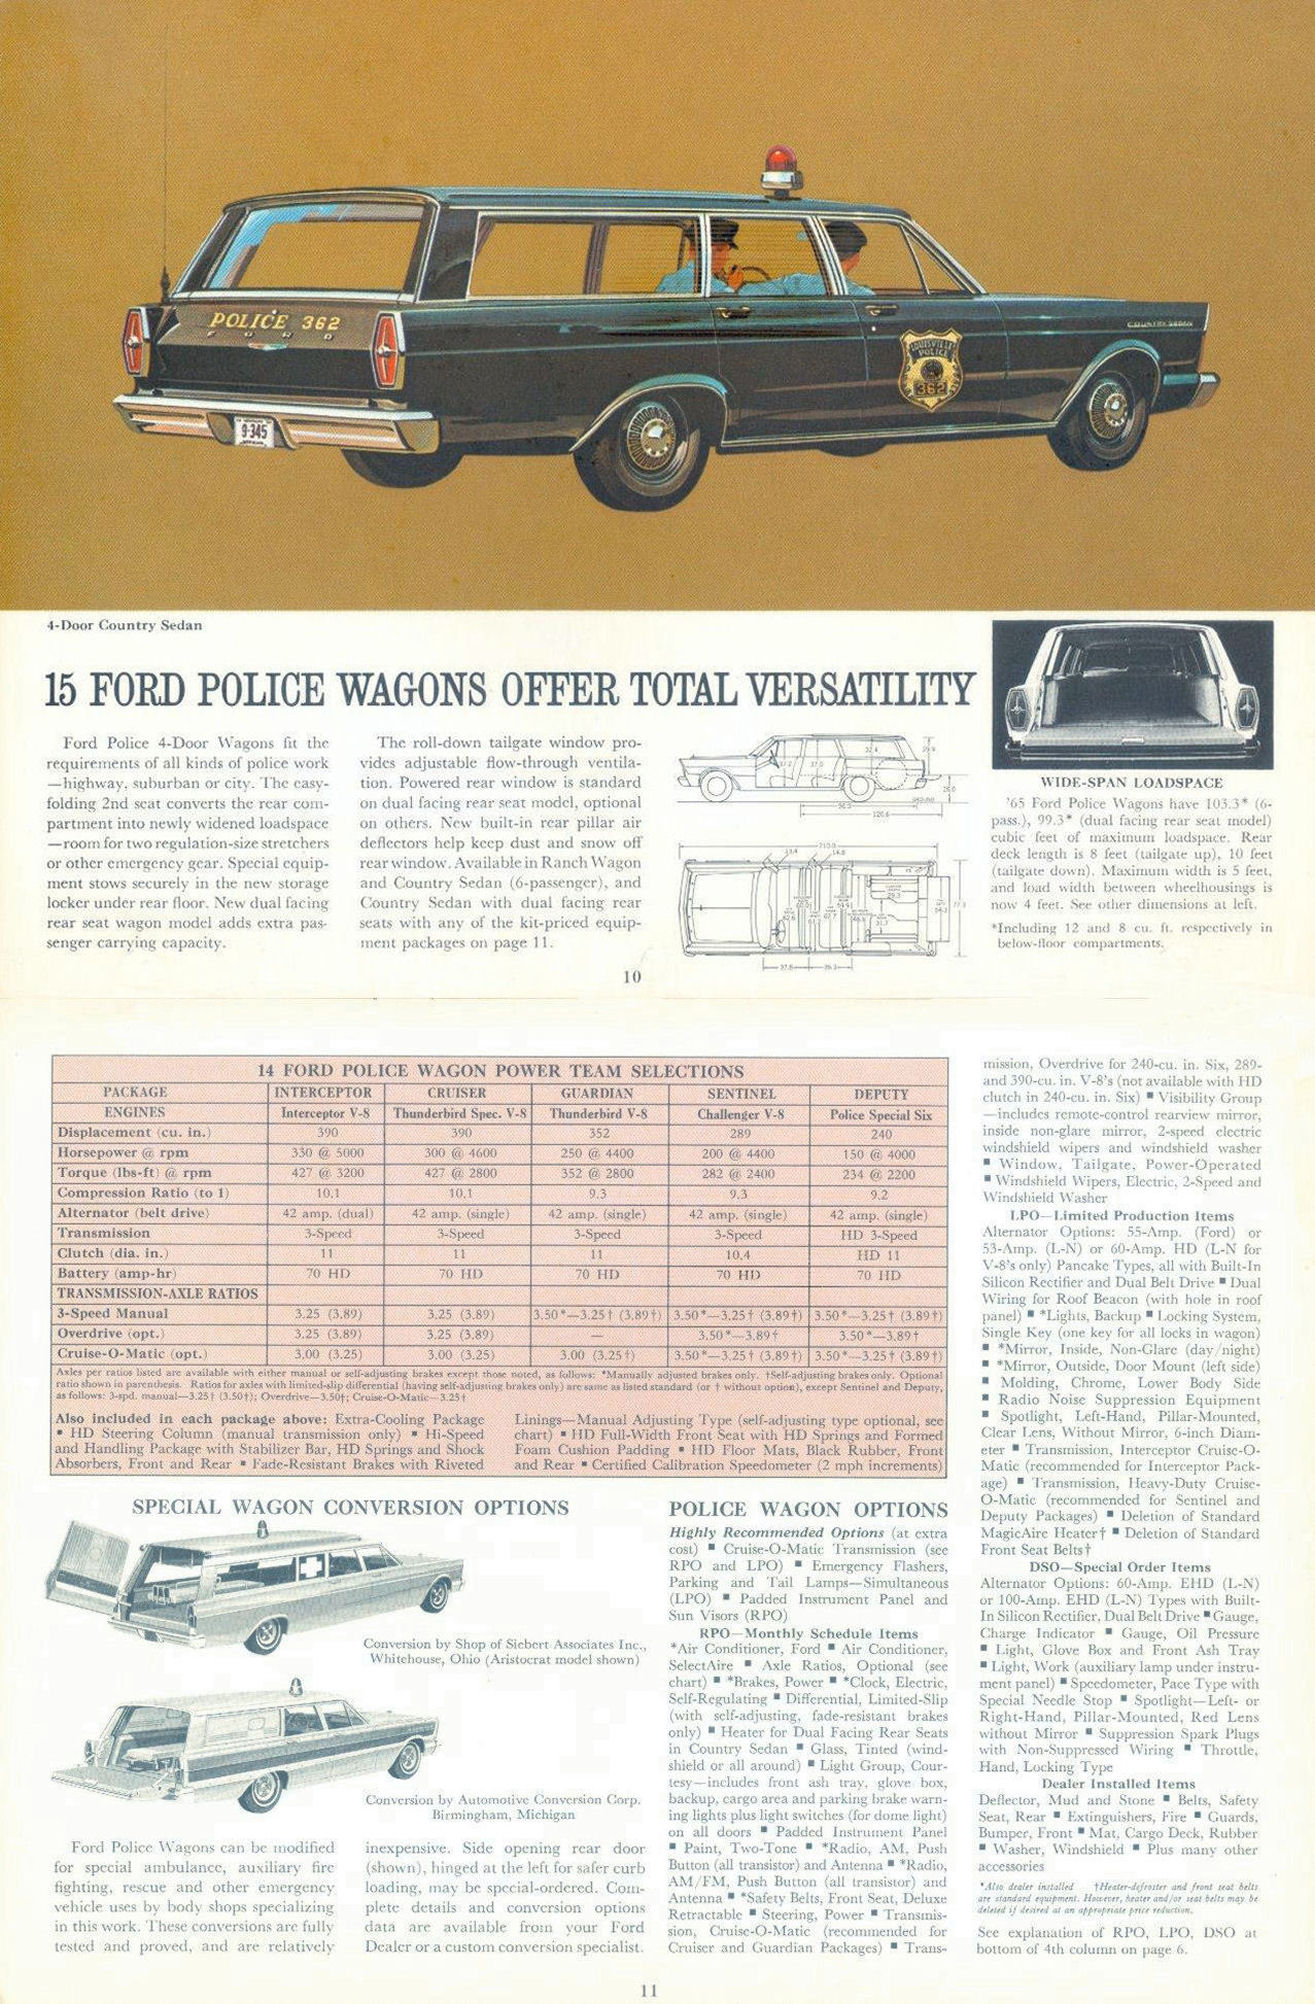 1965_Ford_Police_Cars-10-11